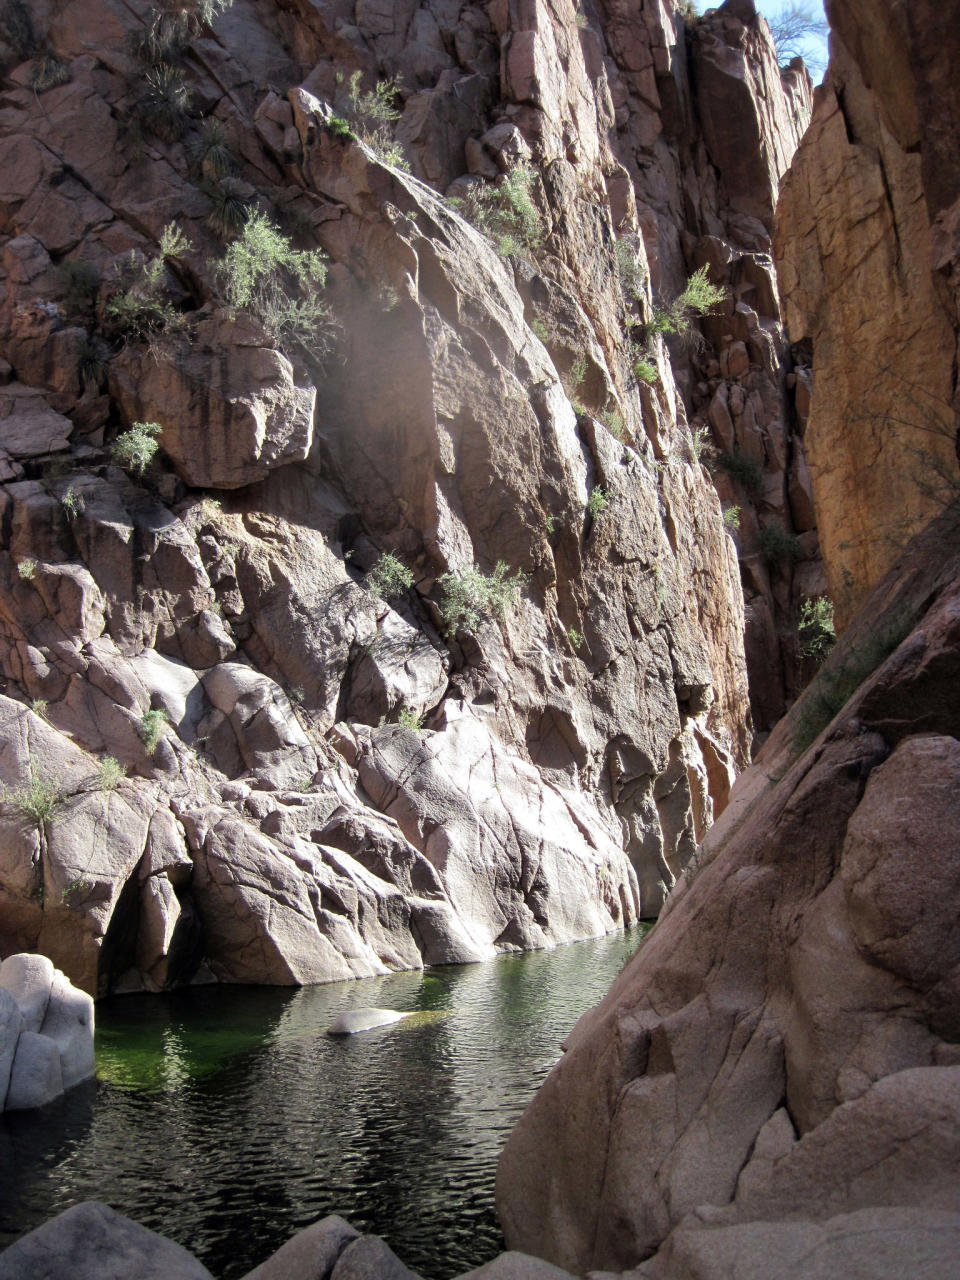 This April 19, 2012 photo shows Salome Creek in Salome Canyon, in Arizona’s Tonto National Forest. A canyoneering expedition in the area includes hiking, climbing, sliding and wetsuit-wading but can be tackled by novices accompanied by an experienced guide. (AP Photo/Charmaine Noronha)